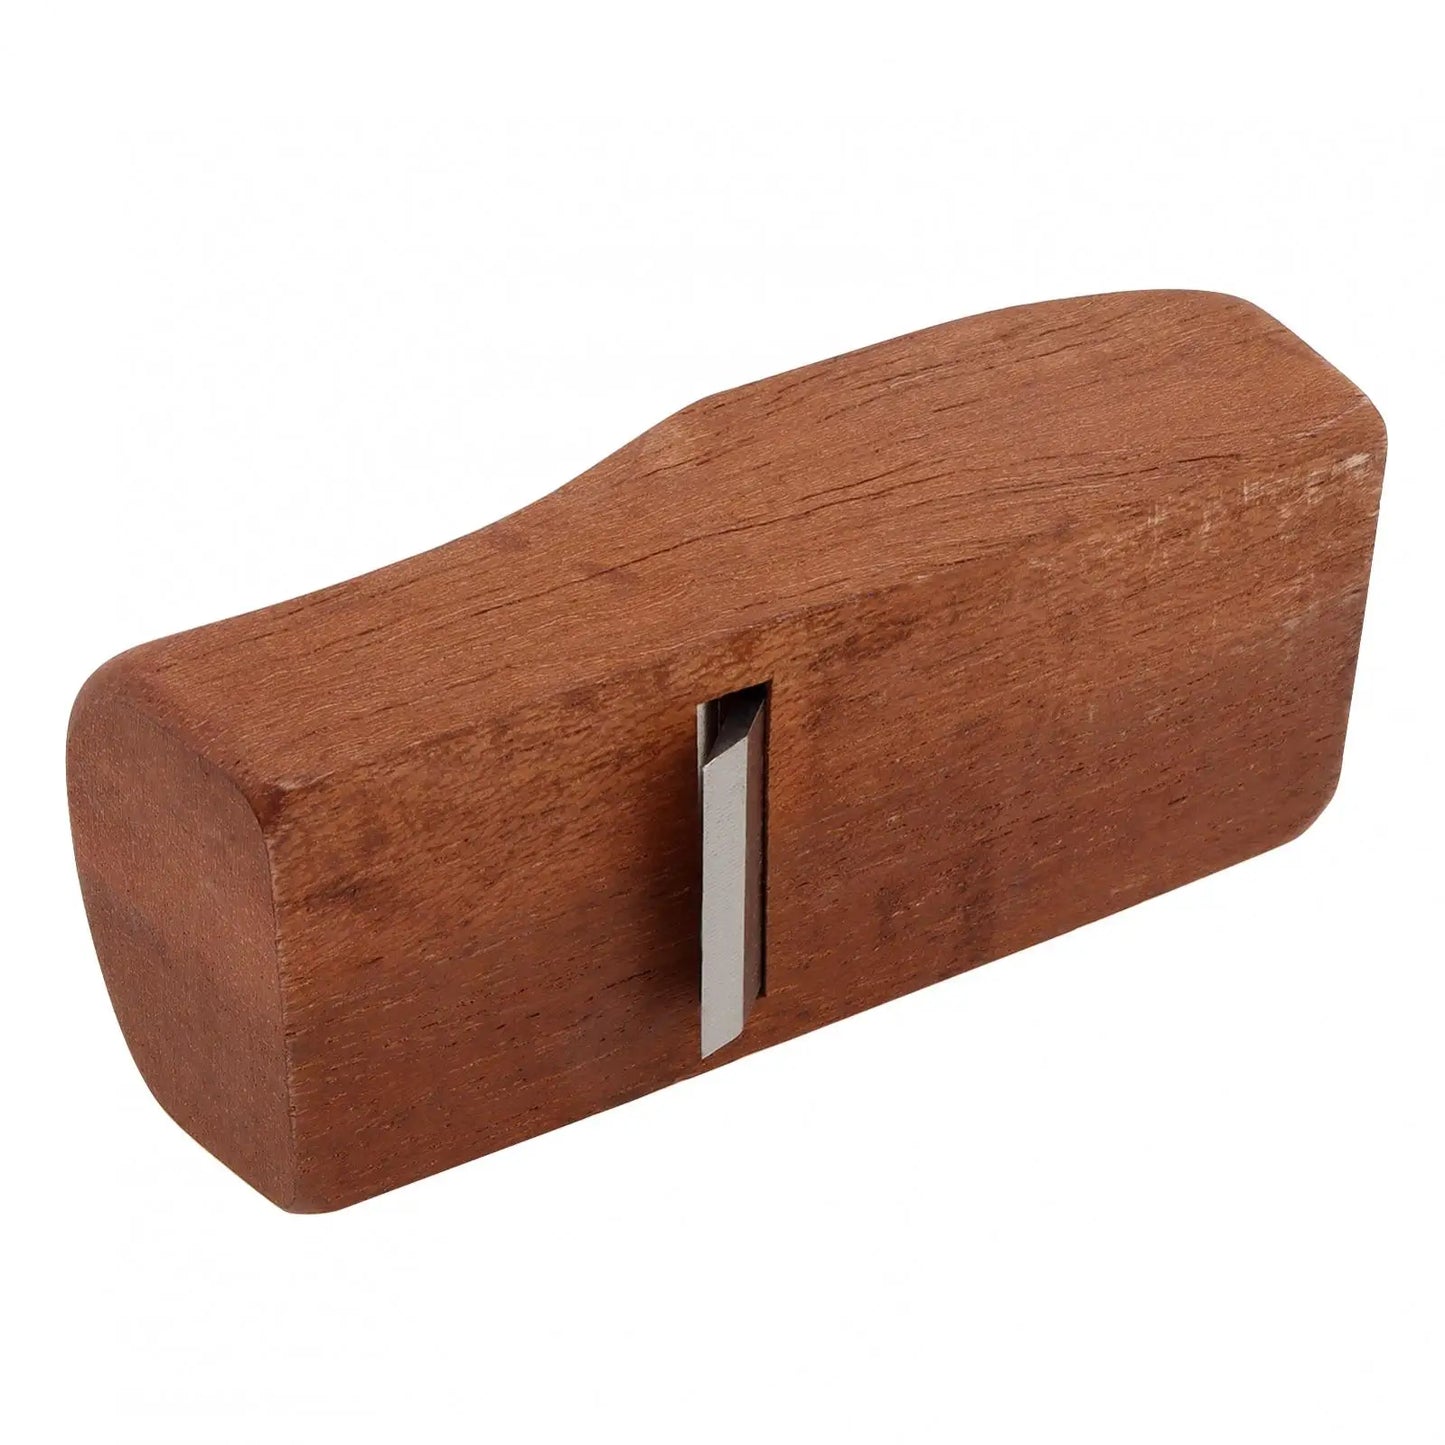 Wood Mini Hand Planes Portable Woodworking Edge Trimming Plane